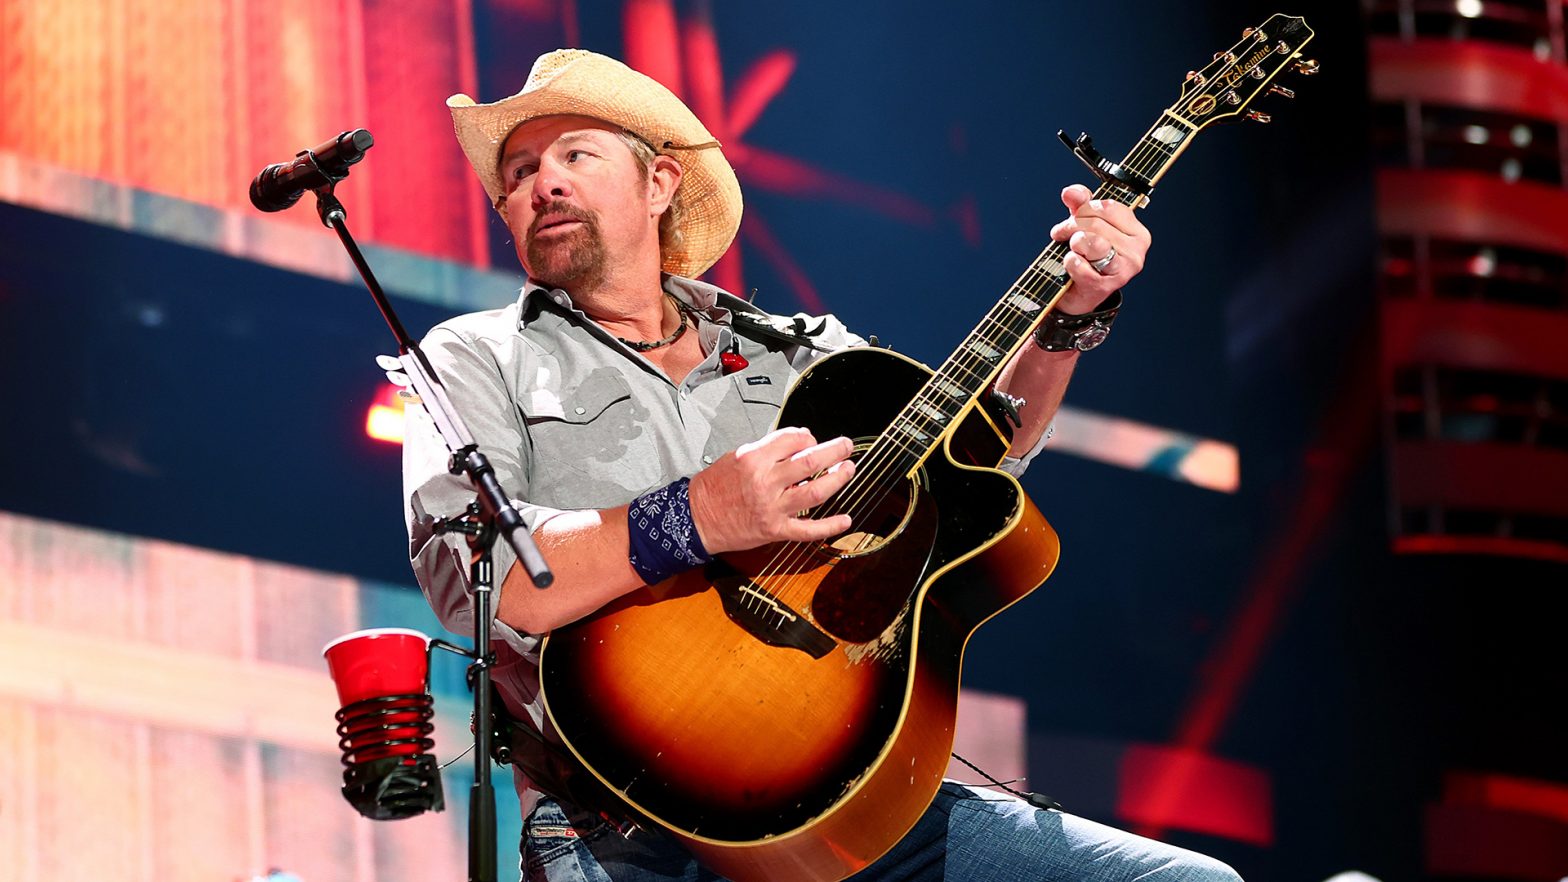 Toby Keith: Cause of death, age, net worth, wife, family, controversies, career and more